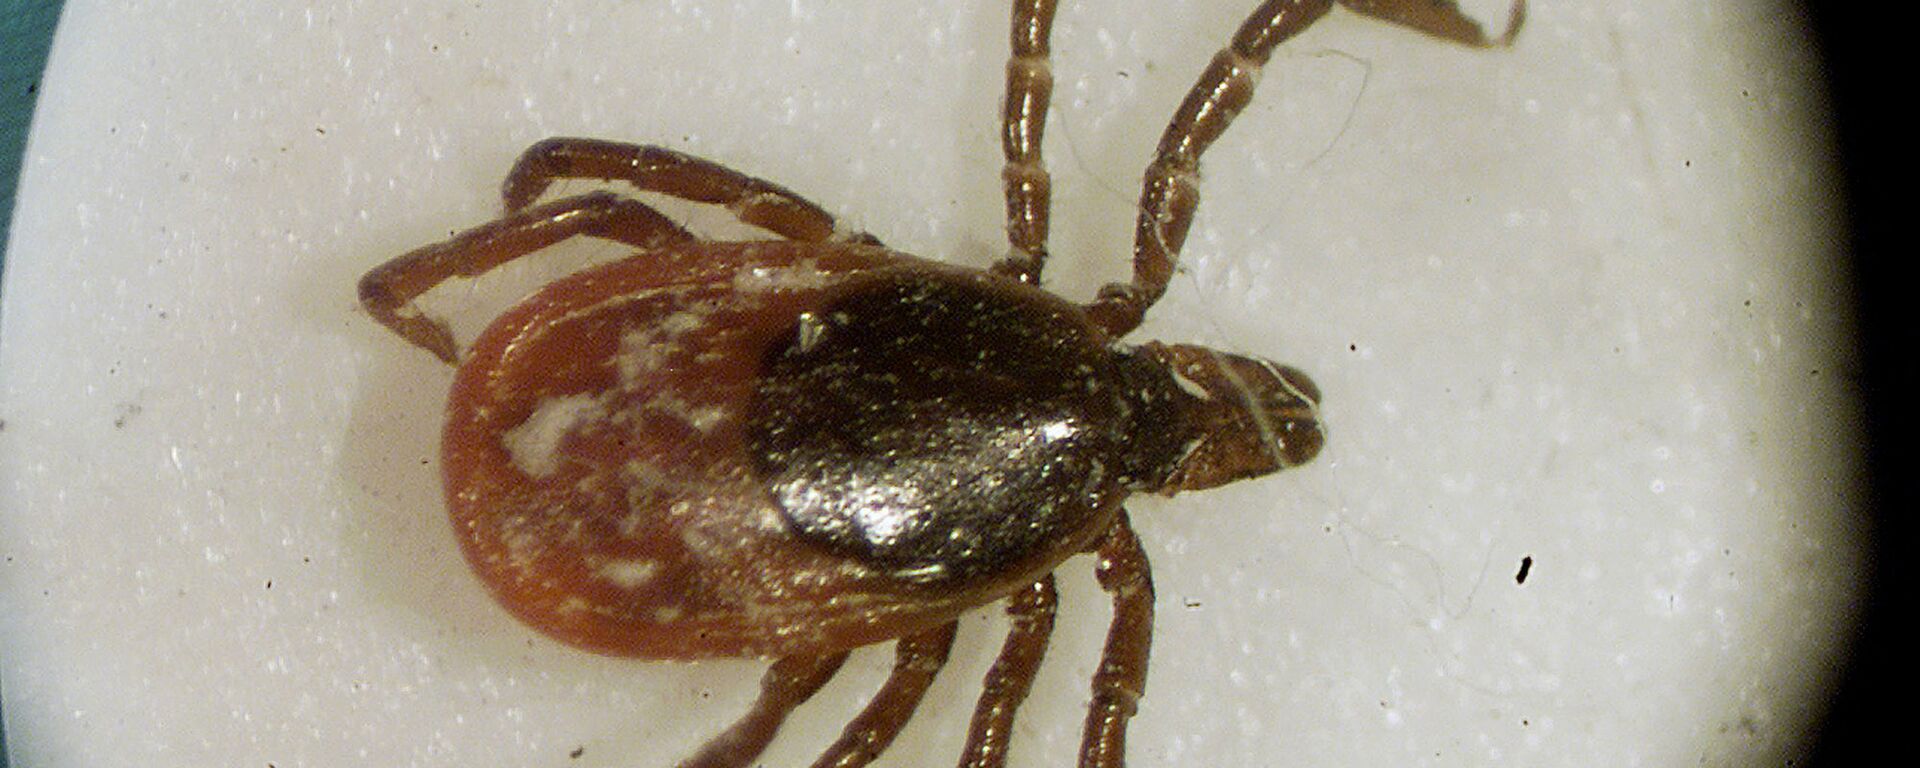 This March 2002 file photo shows a deer tick under a microscope in the entomology lab at the University of Rhode Island in South Kingstown, R.I. Far from a summertime nuisance, Lyme Disease is a potentially debilitating disease that has been subject to vigorous medical debate for more than two decades. At issue is both how to test for the tick-borne disease and how to treat it, especially in patients suffering long-term symptoms like fatigue, arthritis and cognitive problems with memory and concentration. - Sputnik International, 1920, 20.02.2022